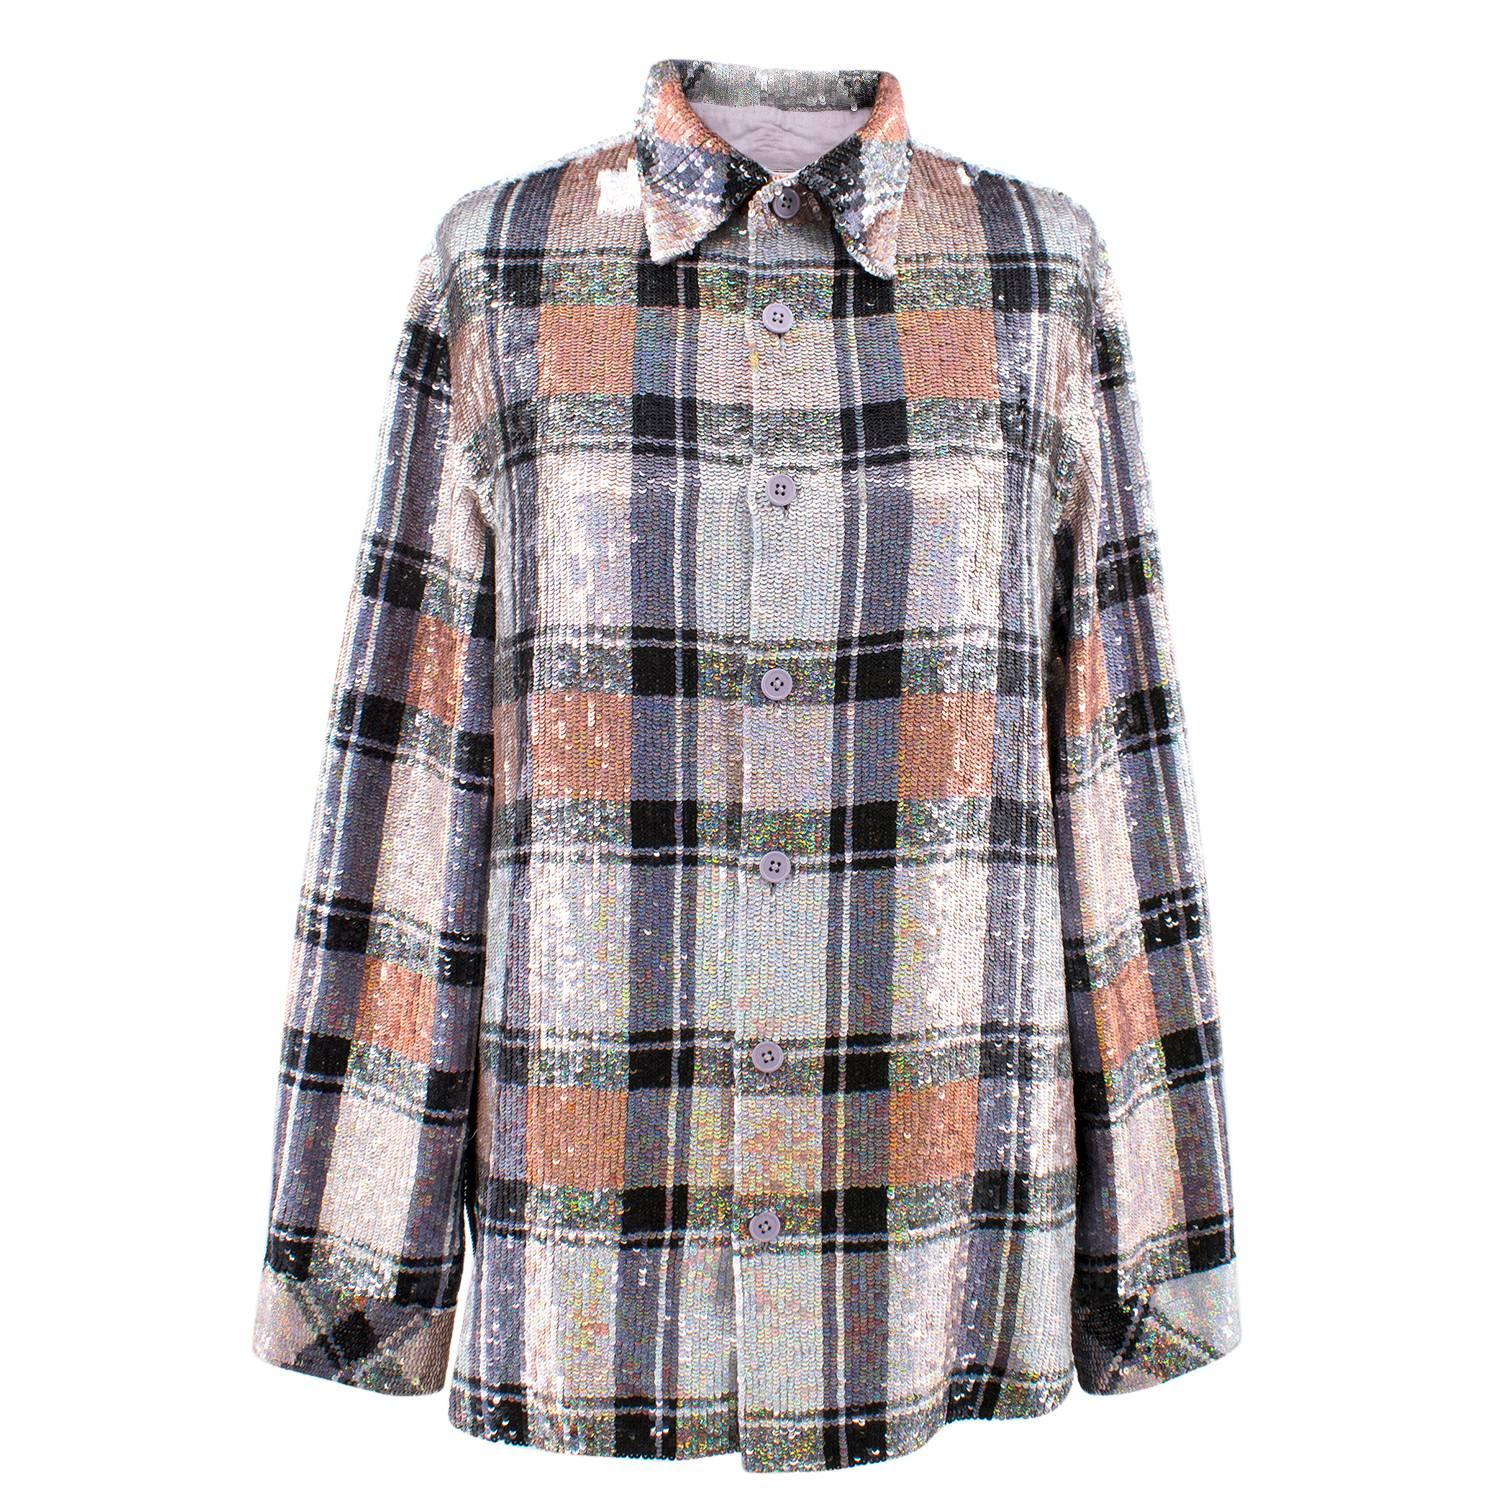 Ashish Sequin embellished checked Shirt.

Current Ashish 2018 Collection. 

100% Cotton. 

Features sequinned plaid pattern, collar, long sleeves, box pleat at the back for definition and front button fastening. 

Perfect condition: 10/10. Never